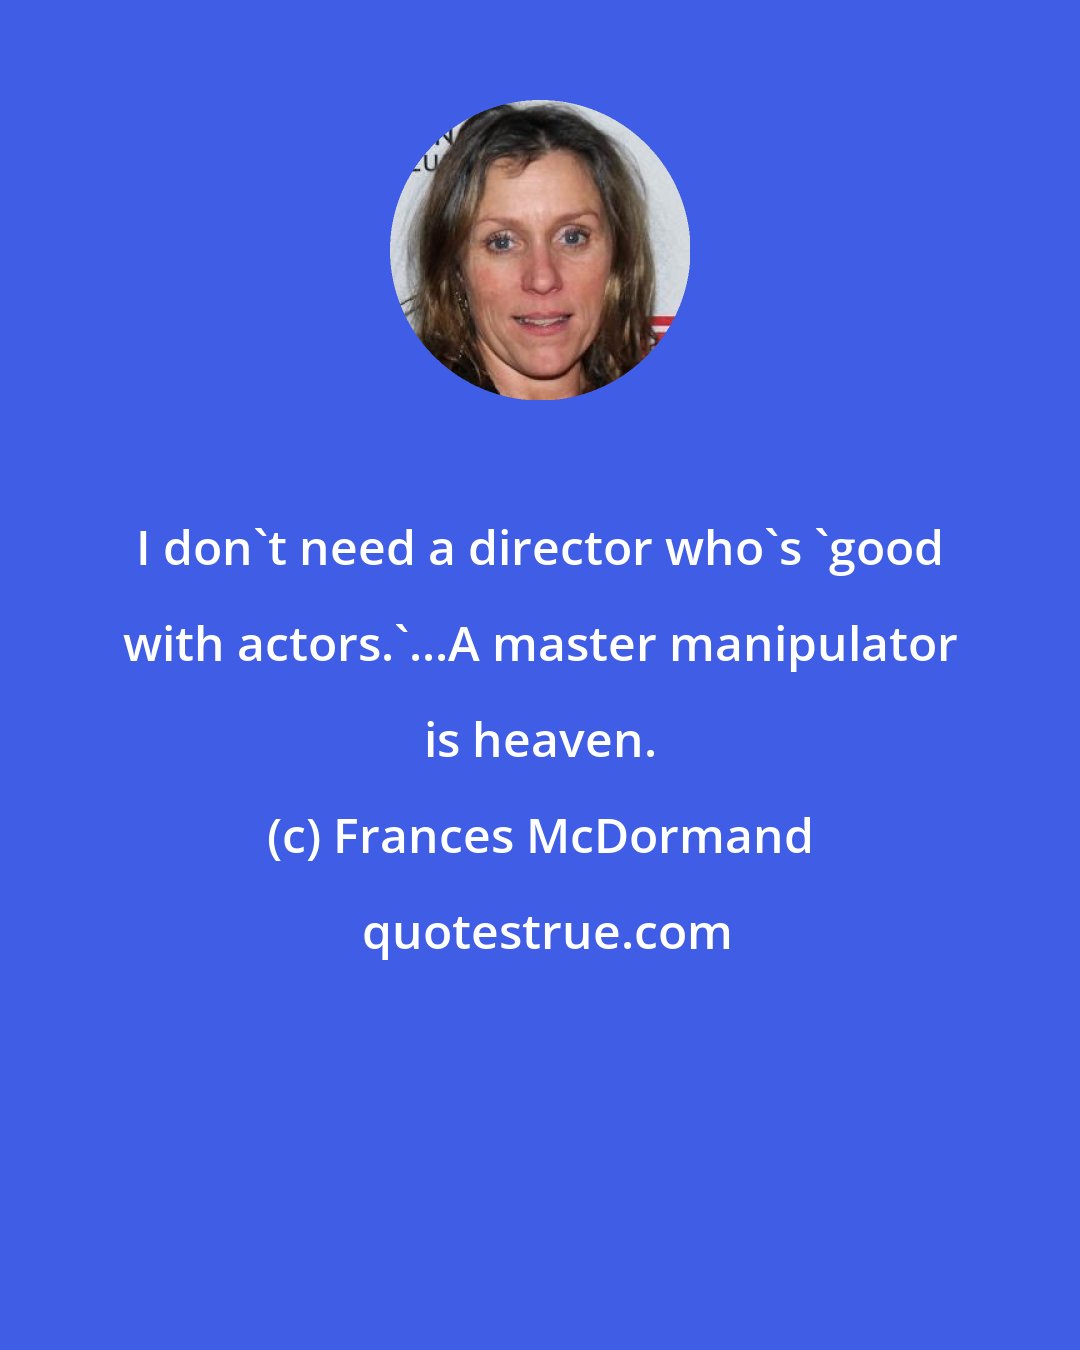 Frances McDormand: I don't need a director who's 'good with actors.'...A master manipulator is heaven.